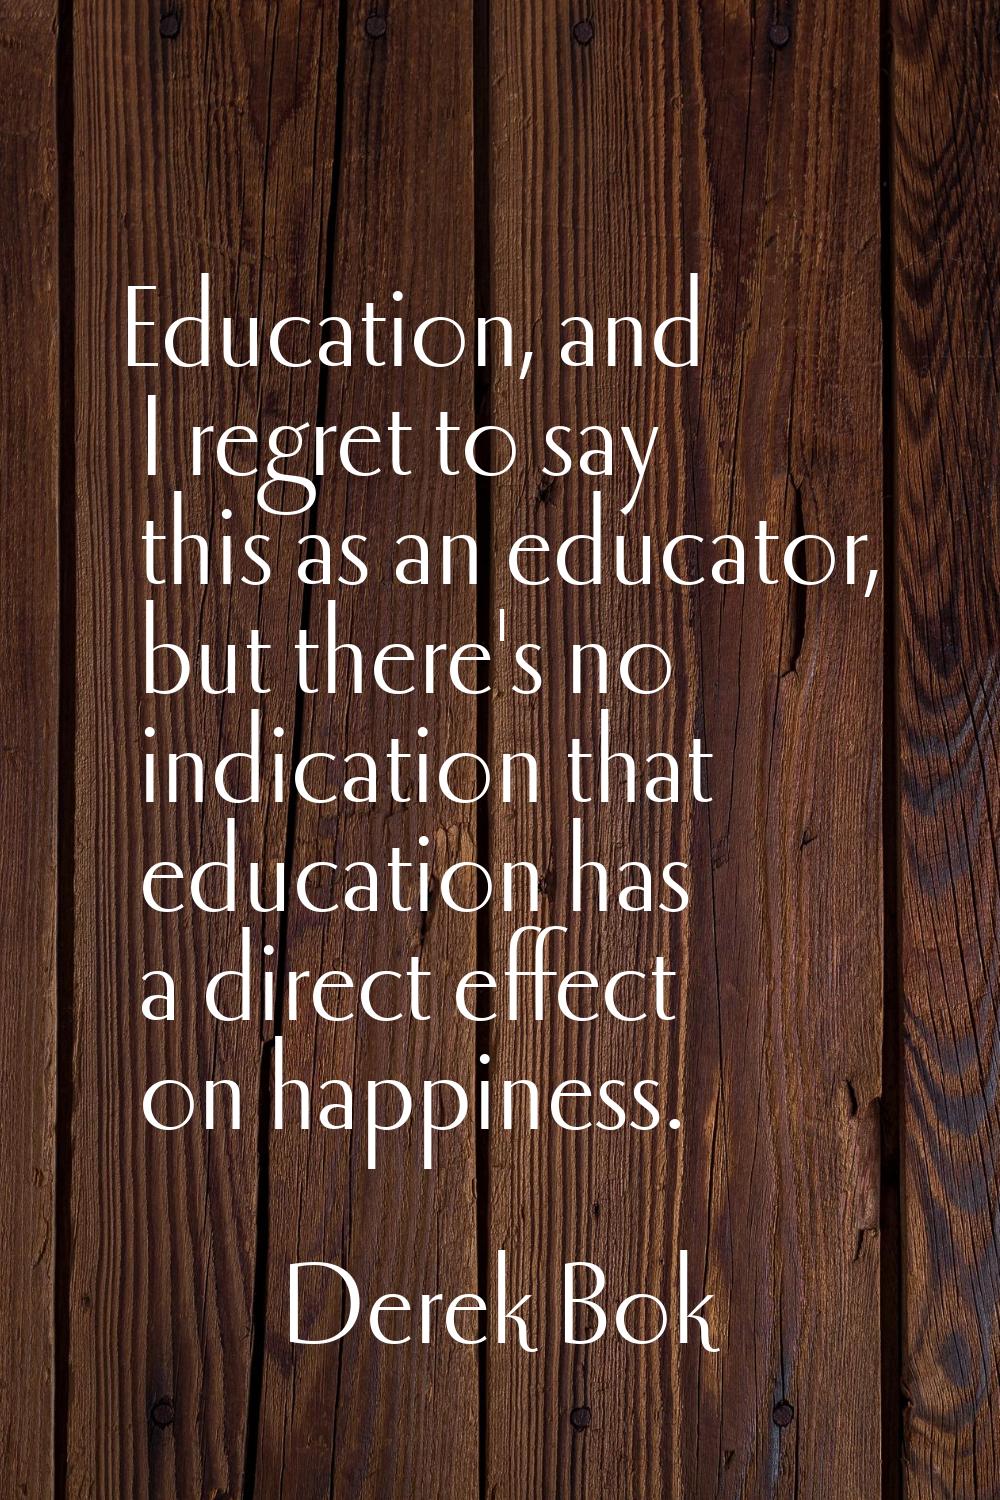 Education, and I regret to say this as an educator, but there's no indication that education has a 